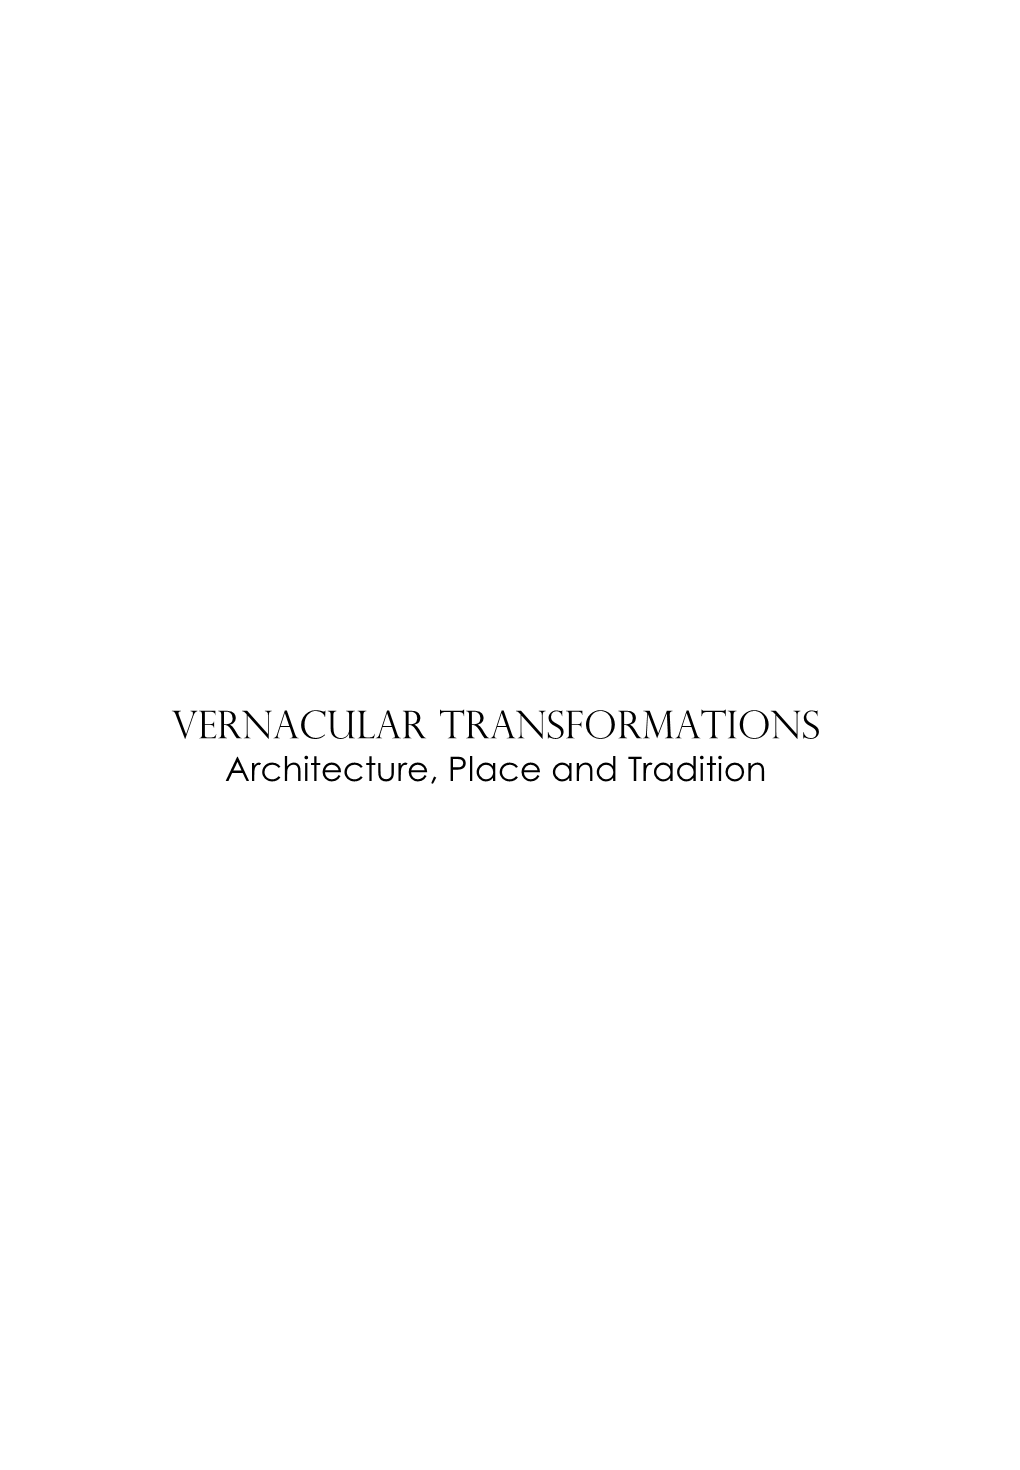 Vernacular Transformations Architecture, Place and Tradition